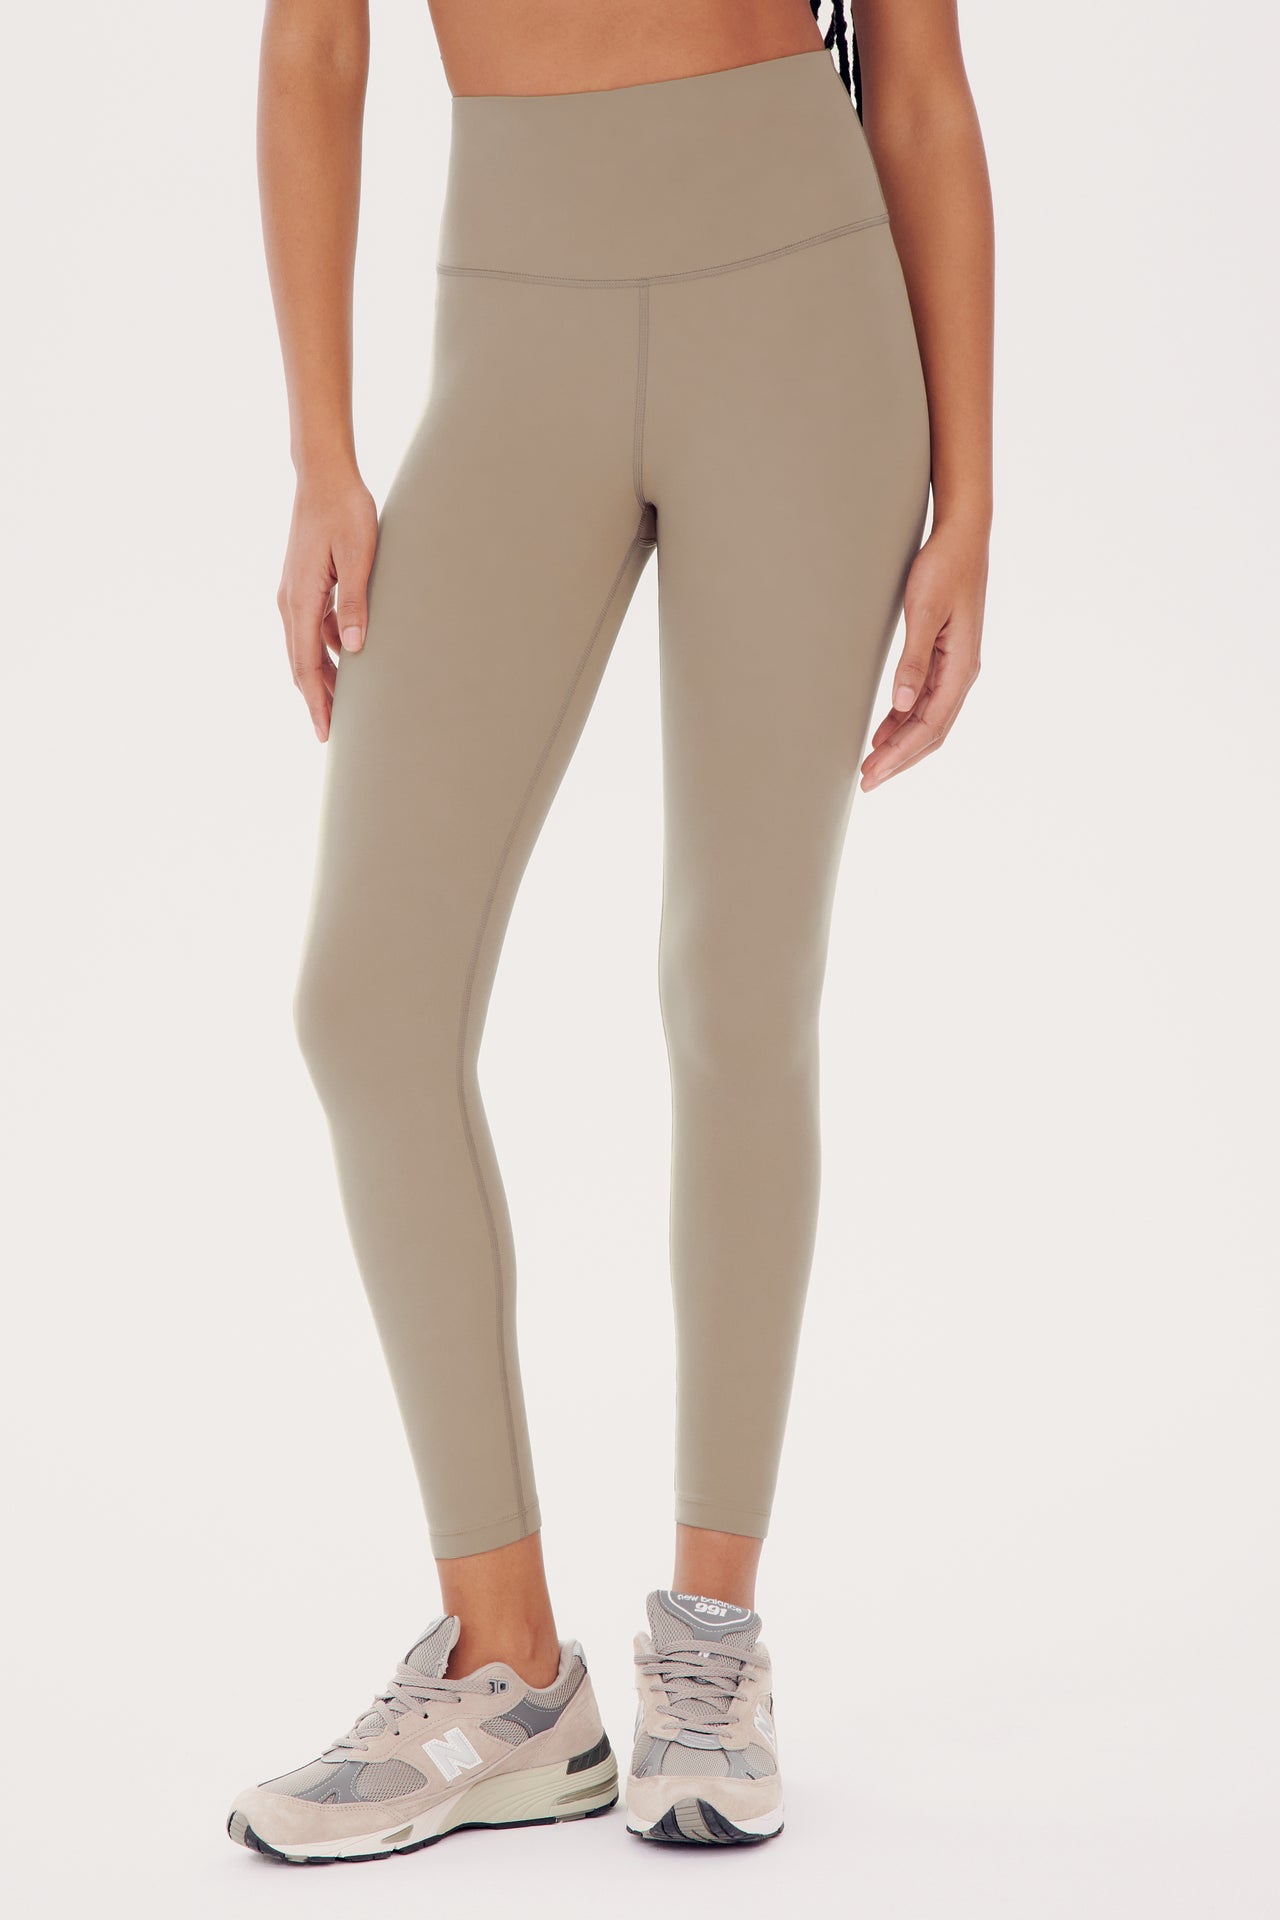 Woman wearing SPLITS59 Sprint High Waist Rigor 7/8 - Latte leggings and gray sneakers standing against a white background.